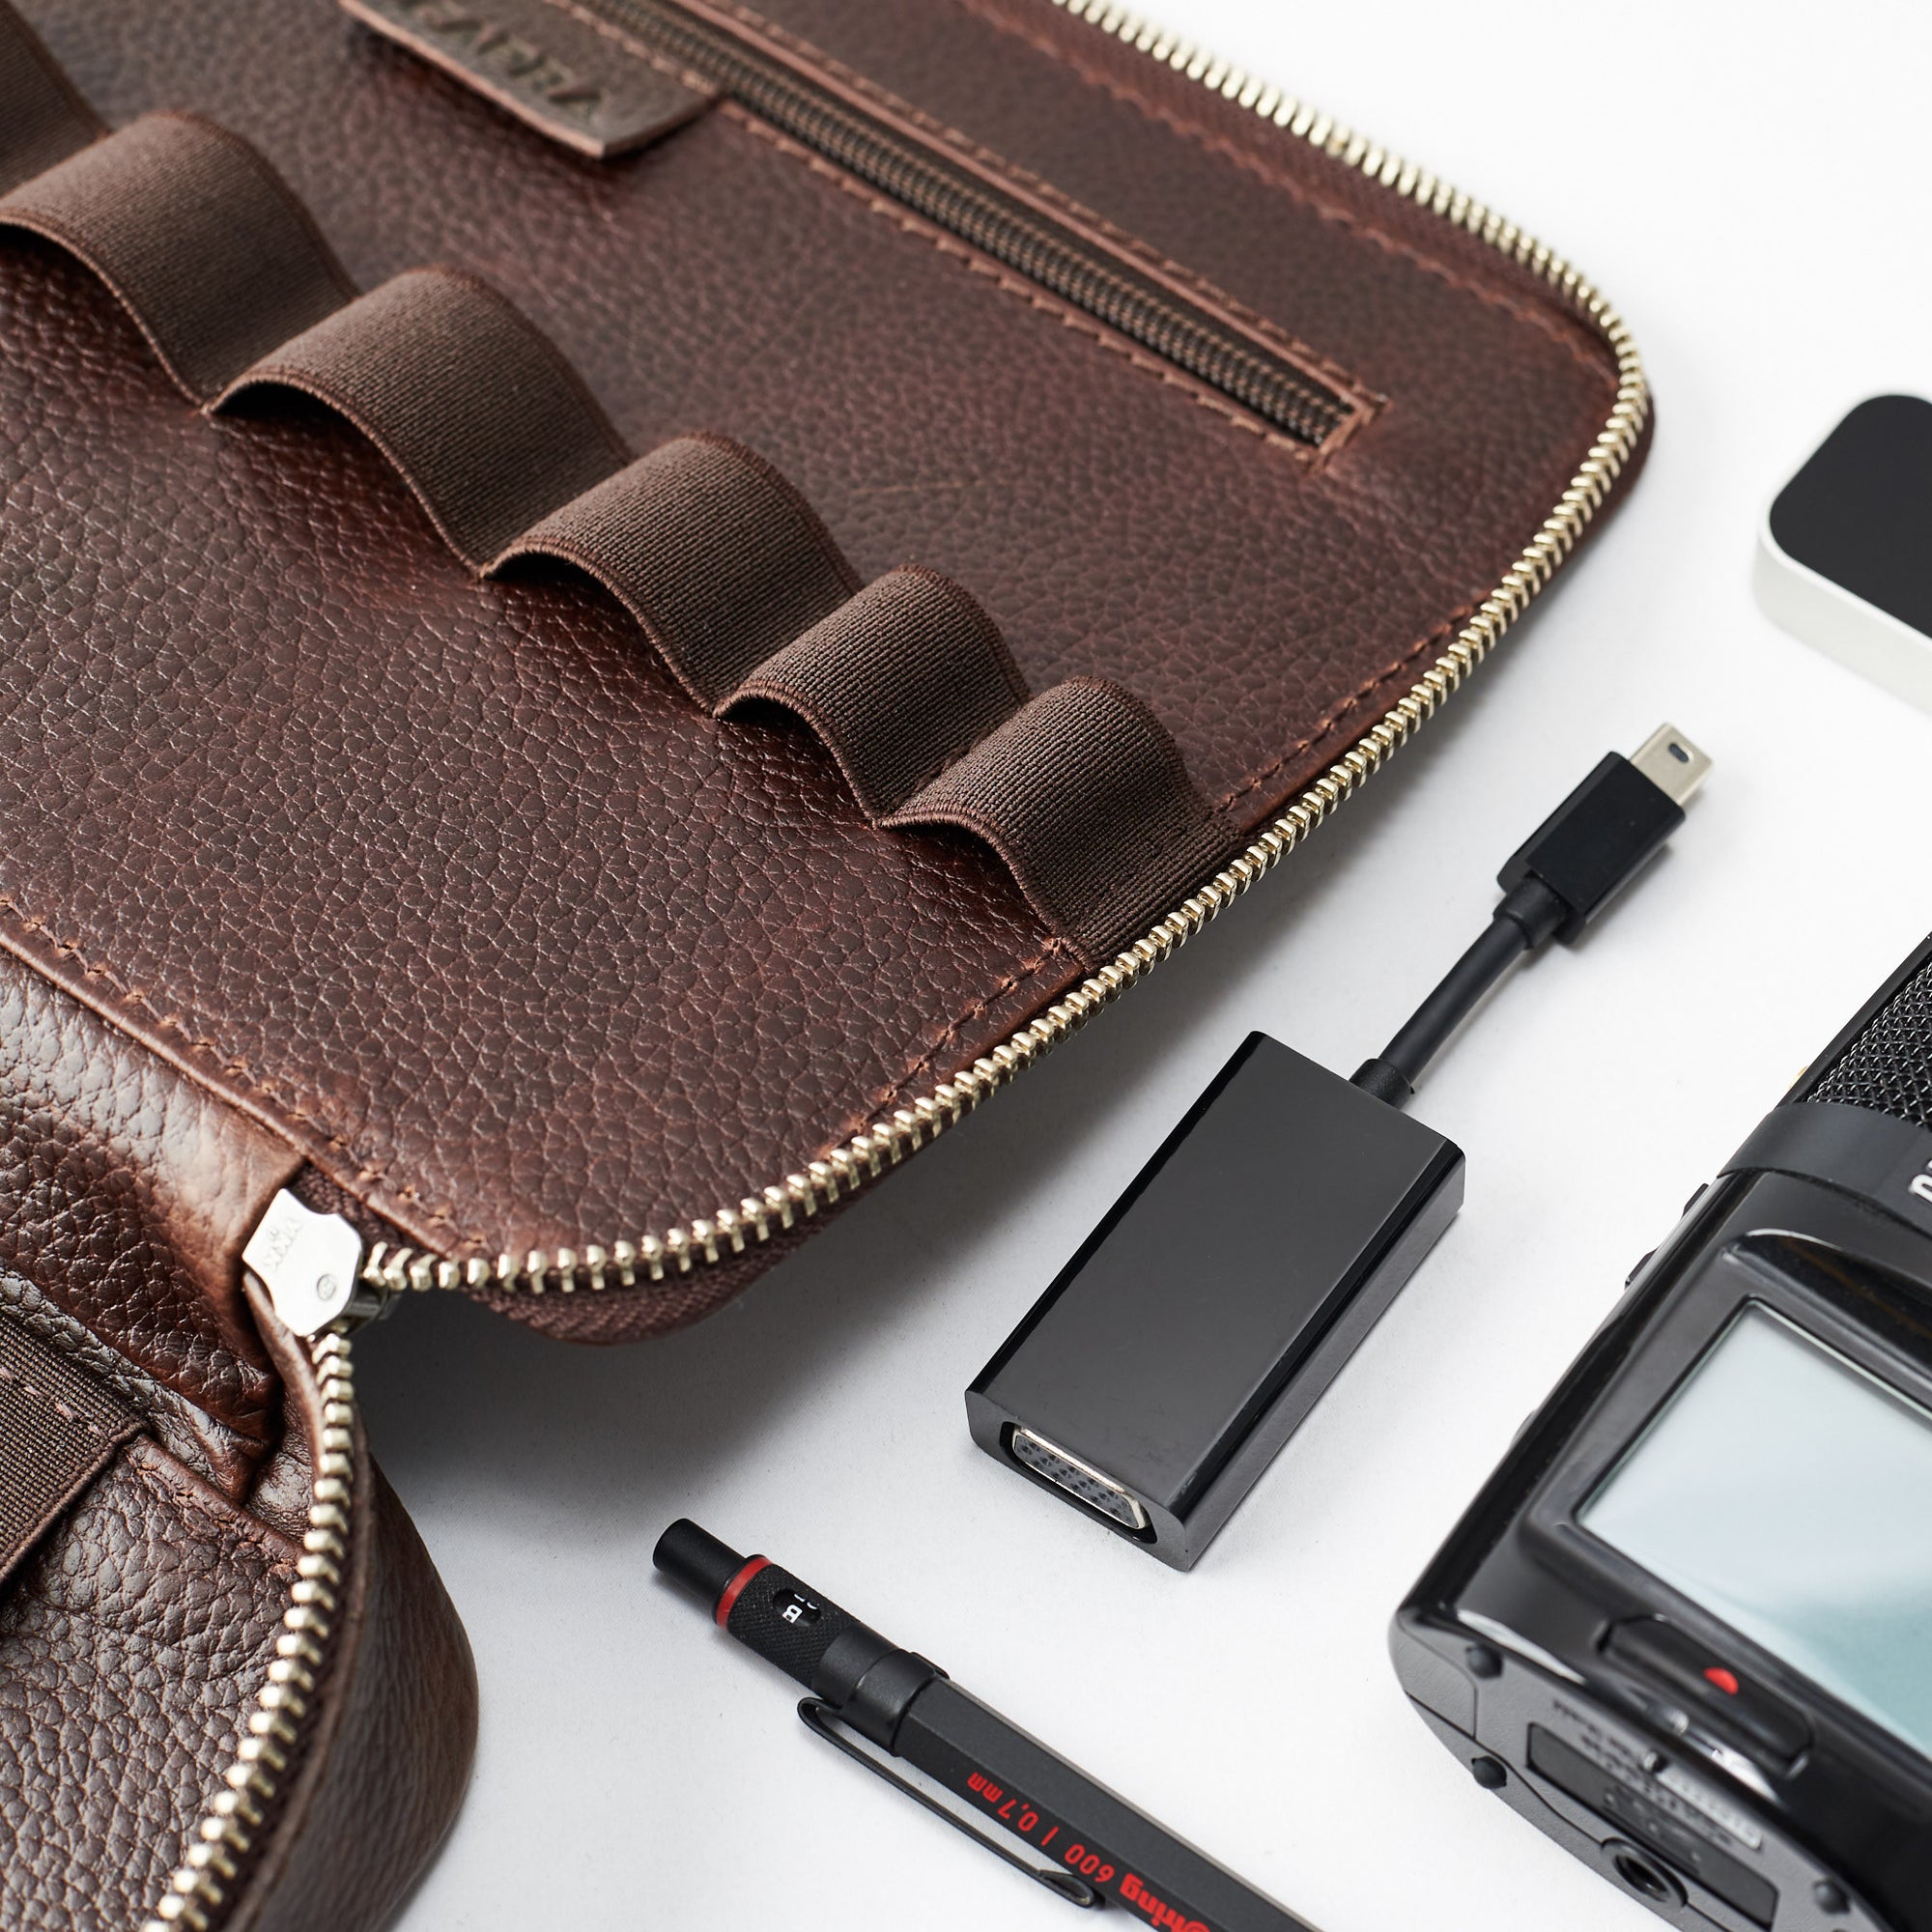 Internal organization. Dark Brown small leather edc gear pouch by Capra Leather. Fits iPad Pro 11